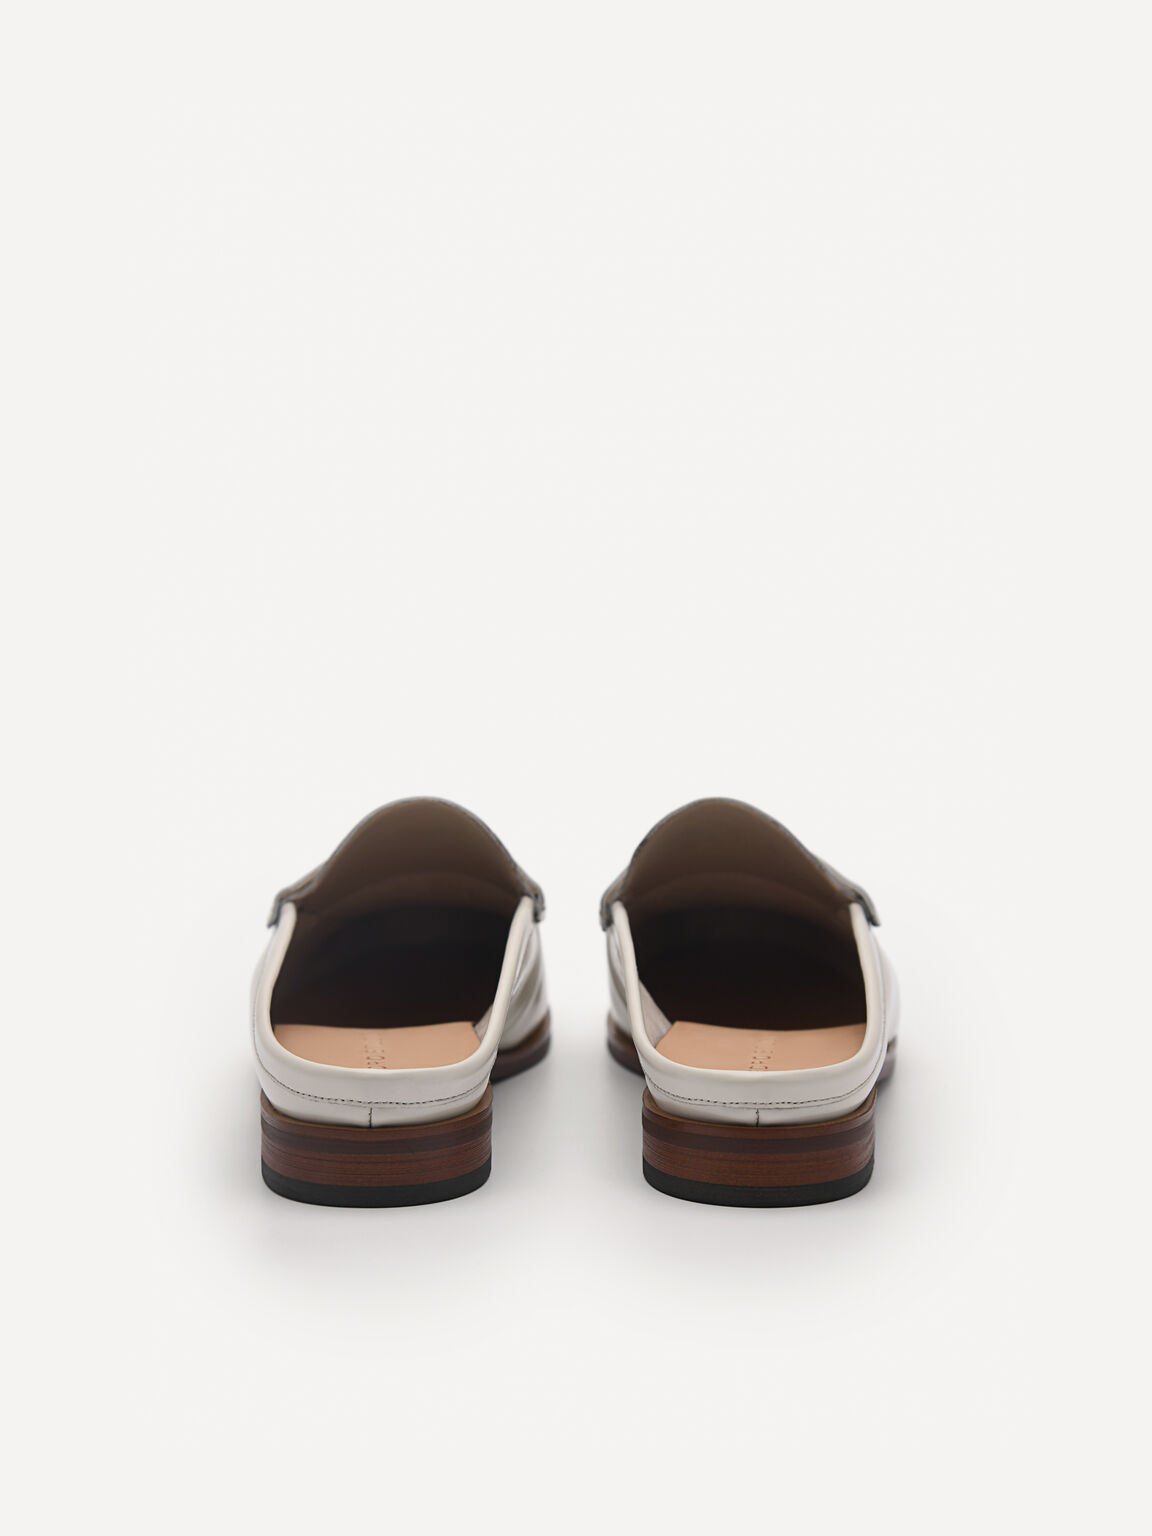 Blake Leather Penny Loafer Mules, Chalk